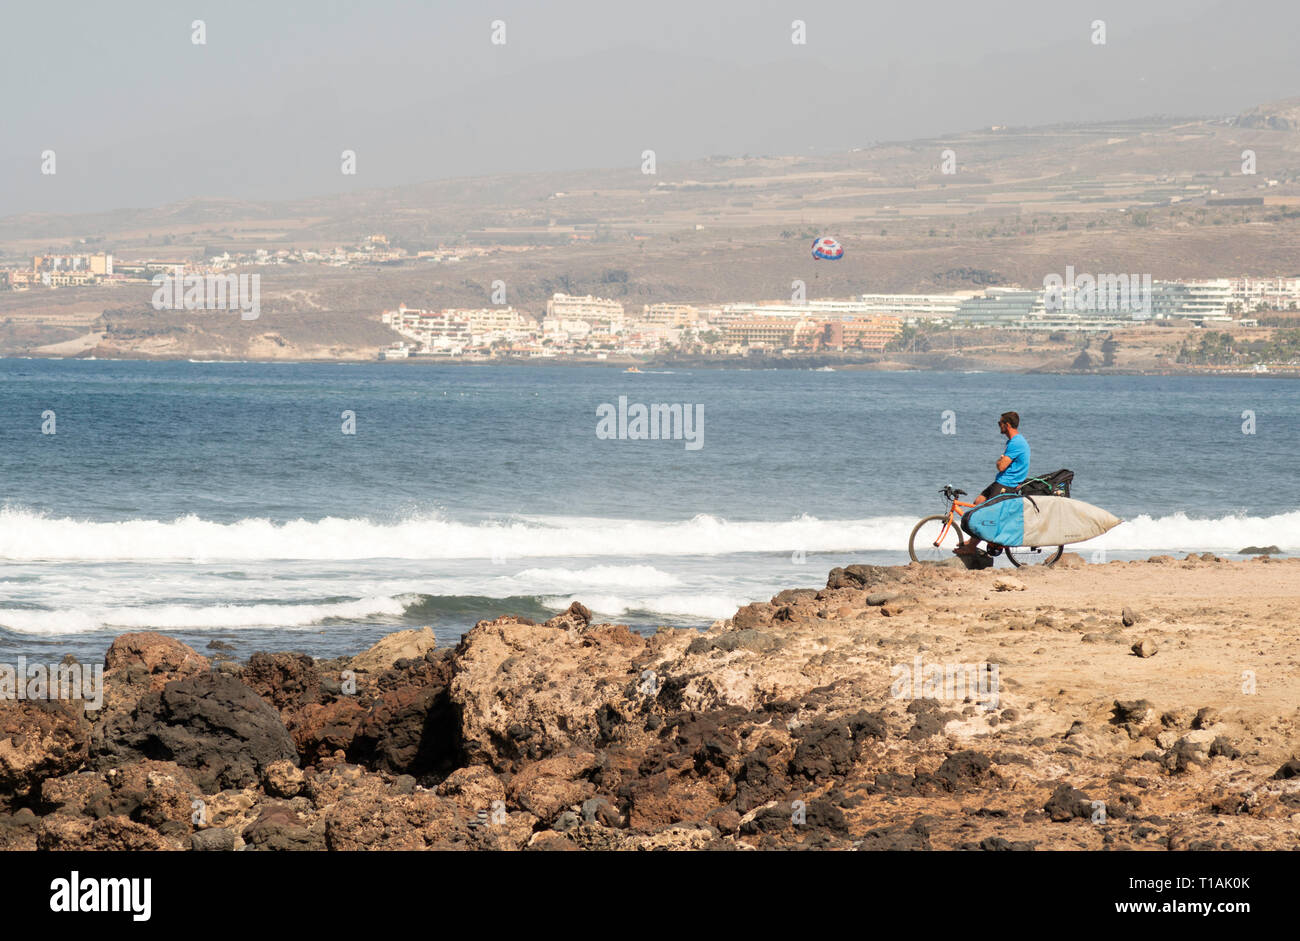 Surfer on bicycle looking out to sea in Costa Adeje, Tenerife, Canary Islands Stock Photo